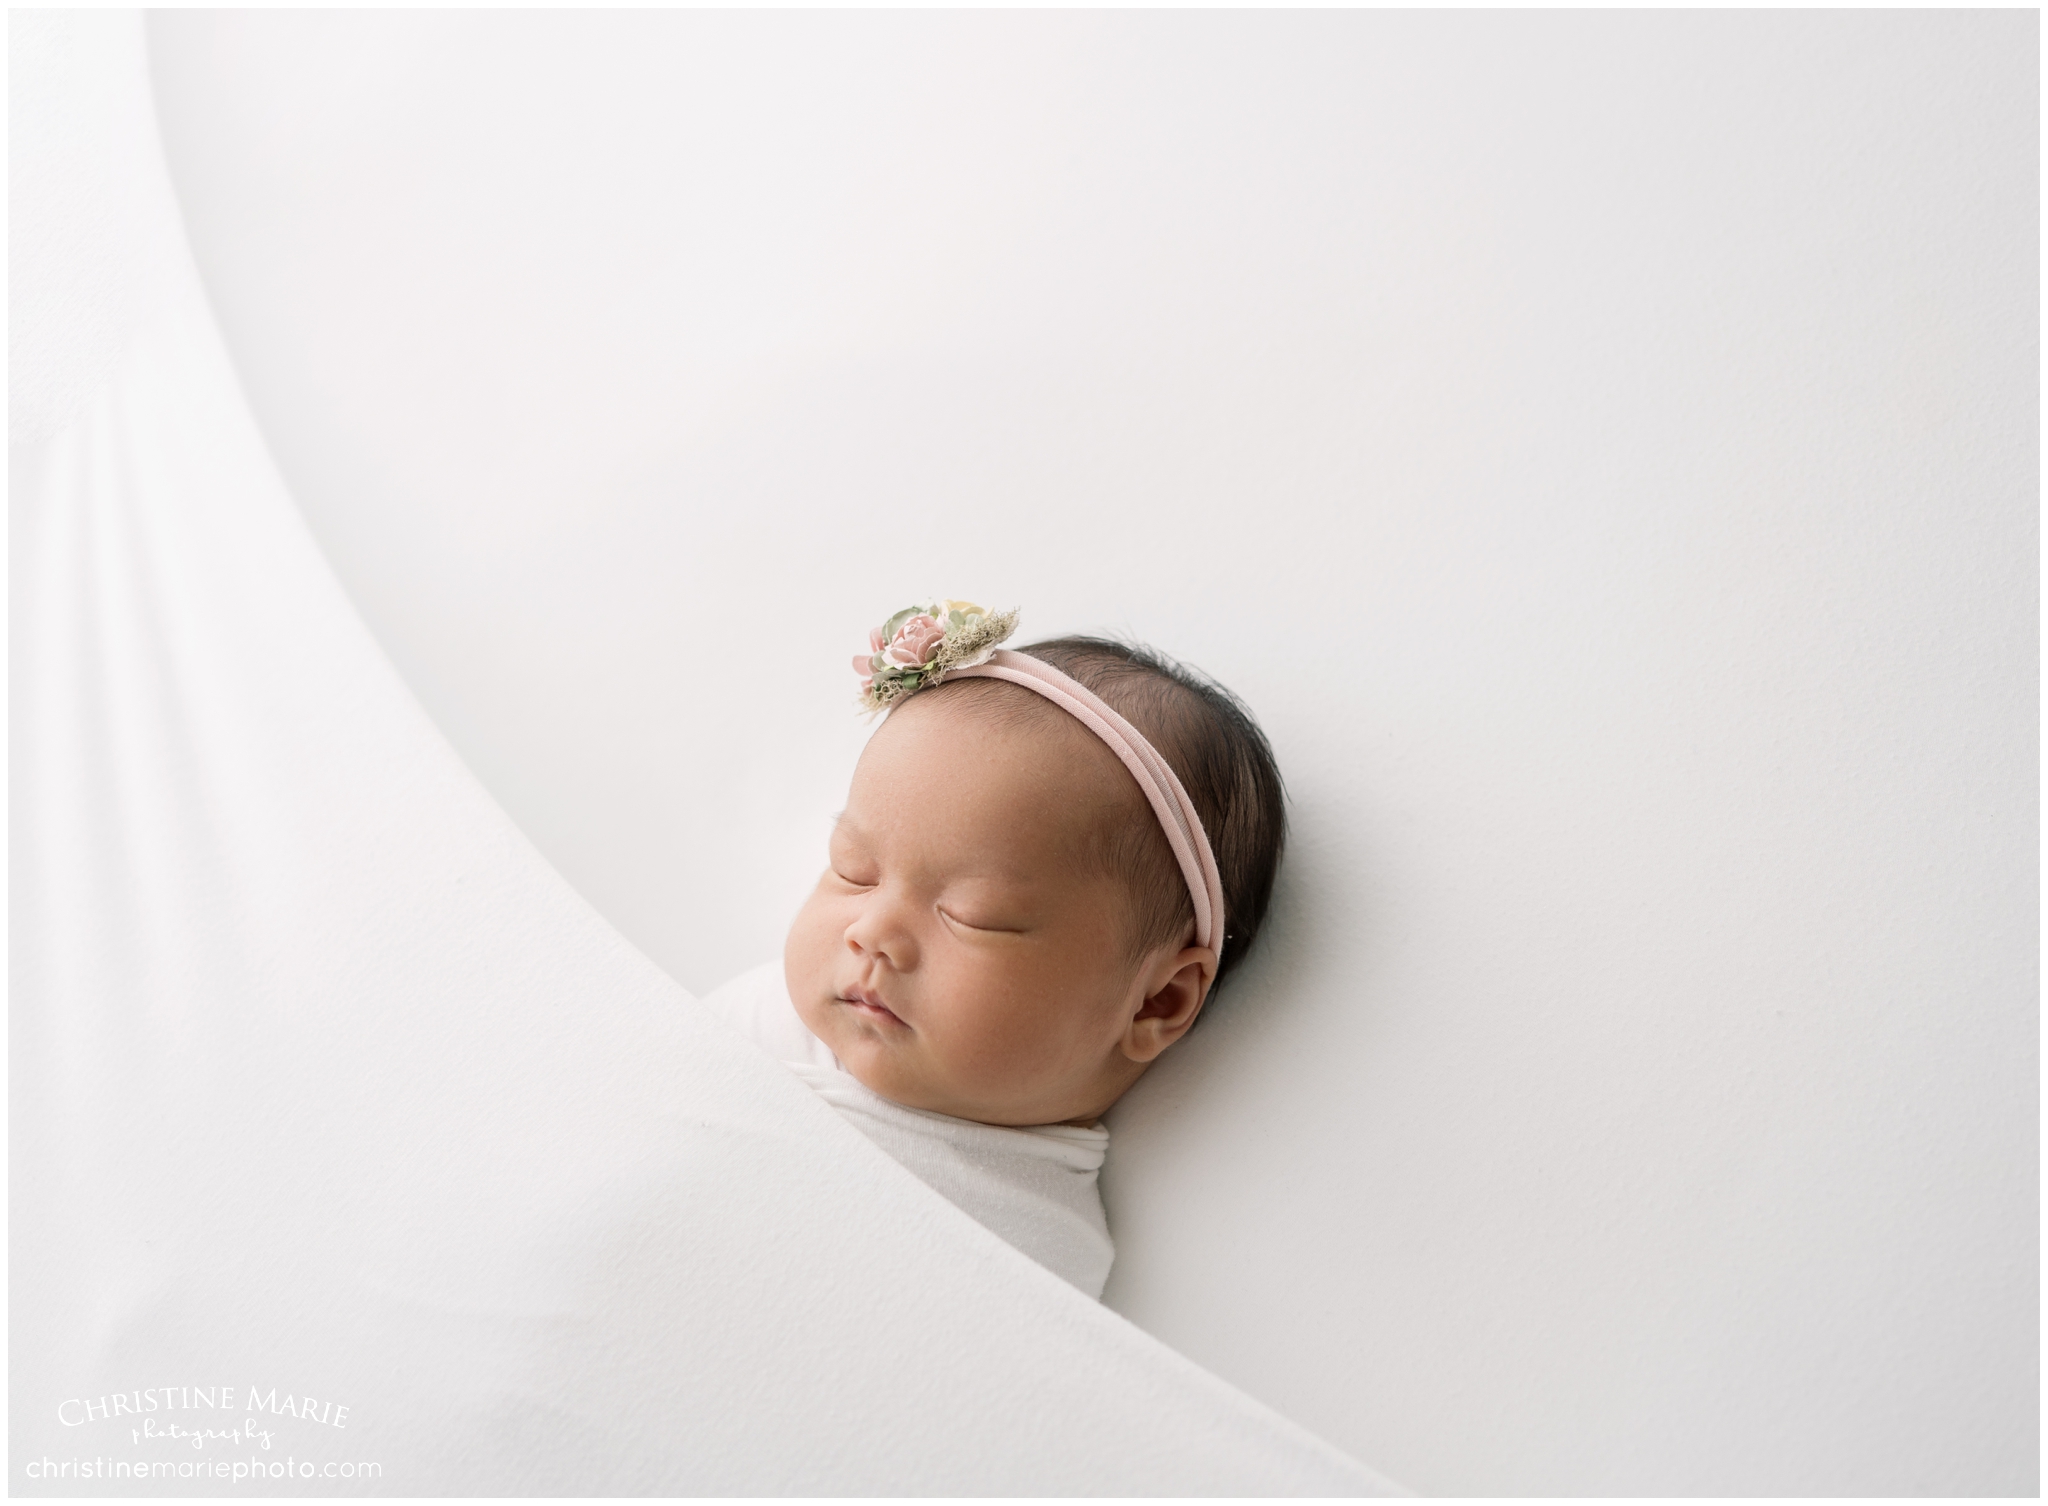 simple newborn photography, christine clements 